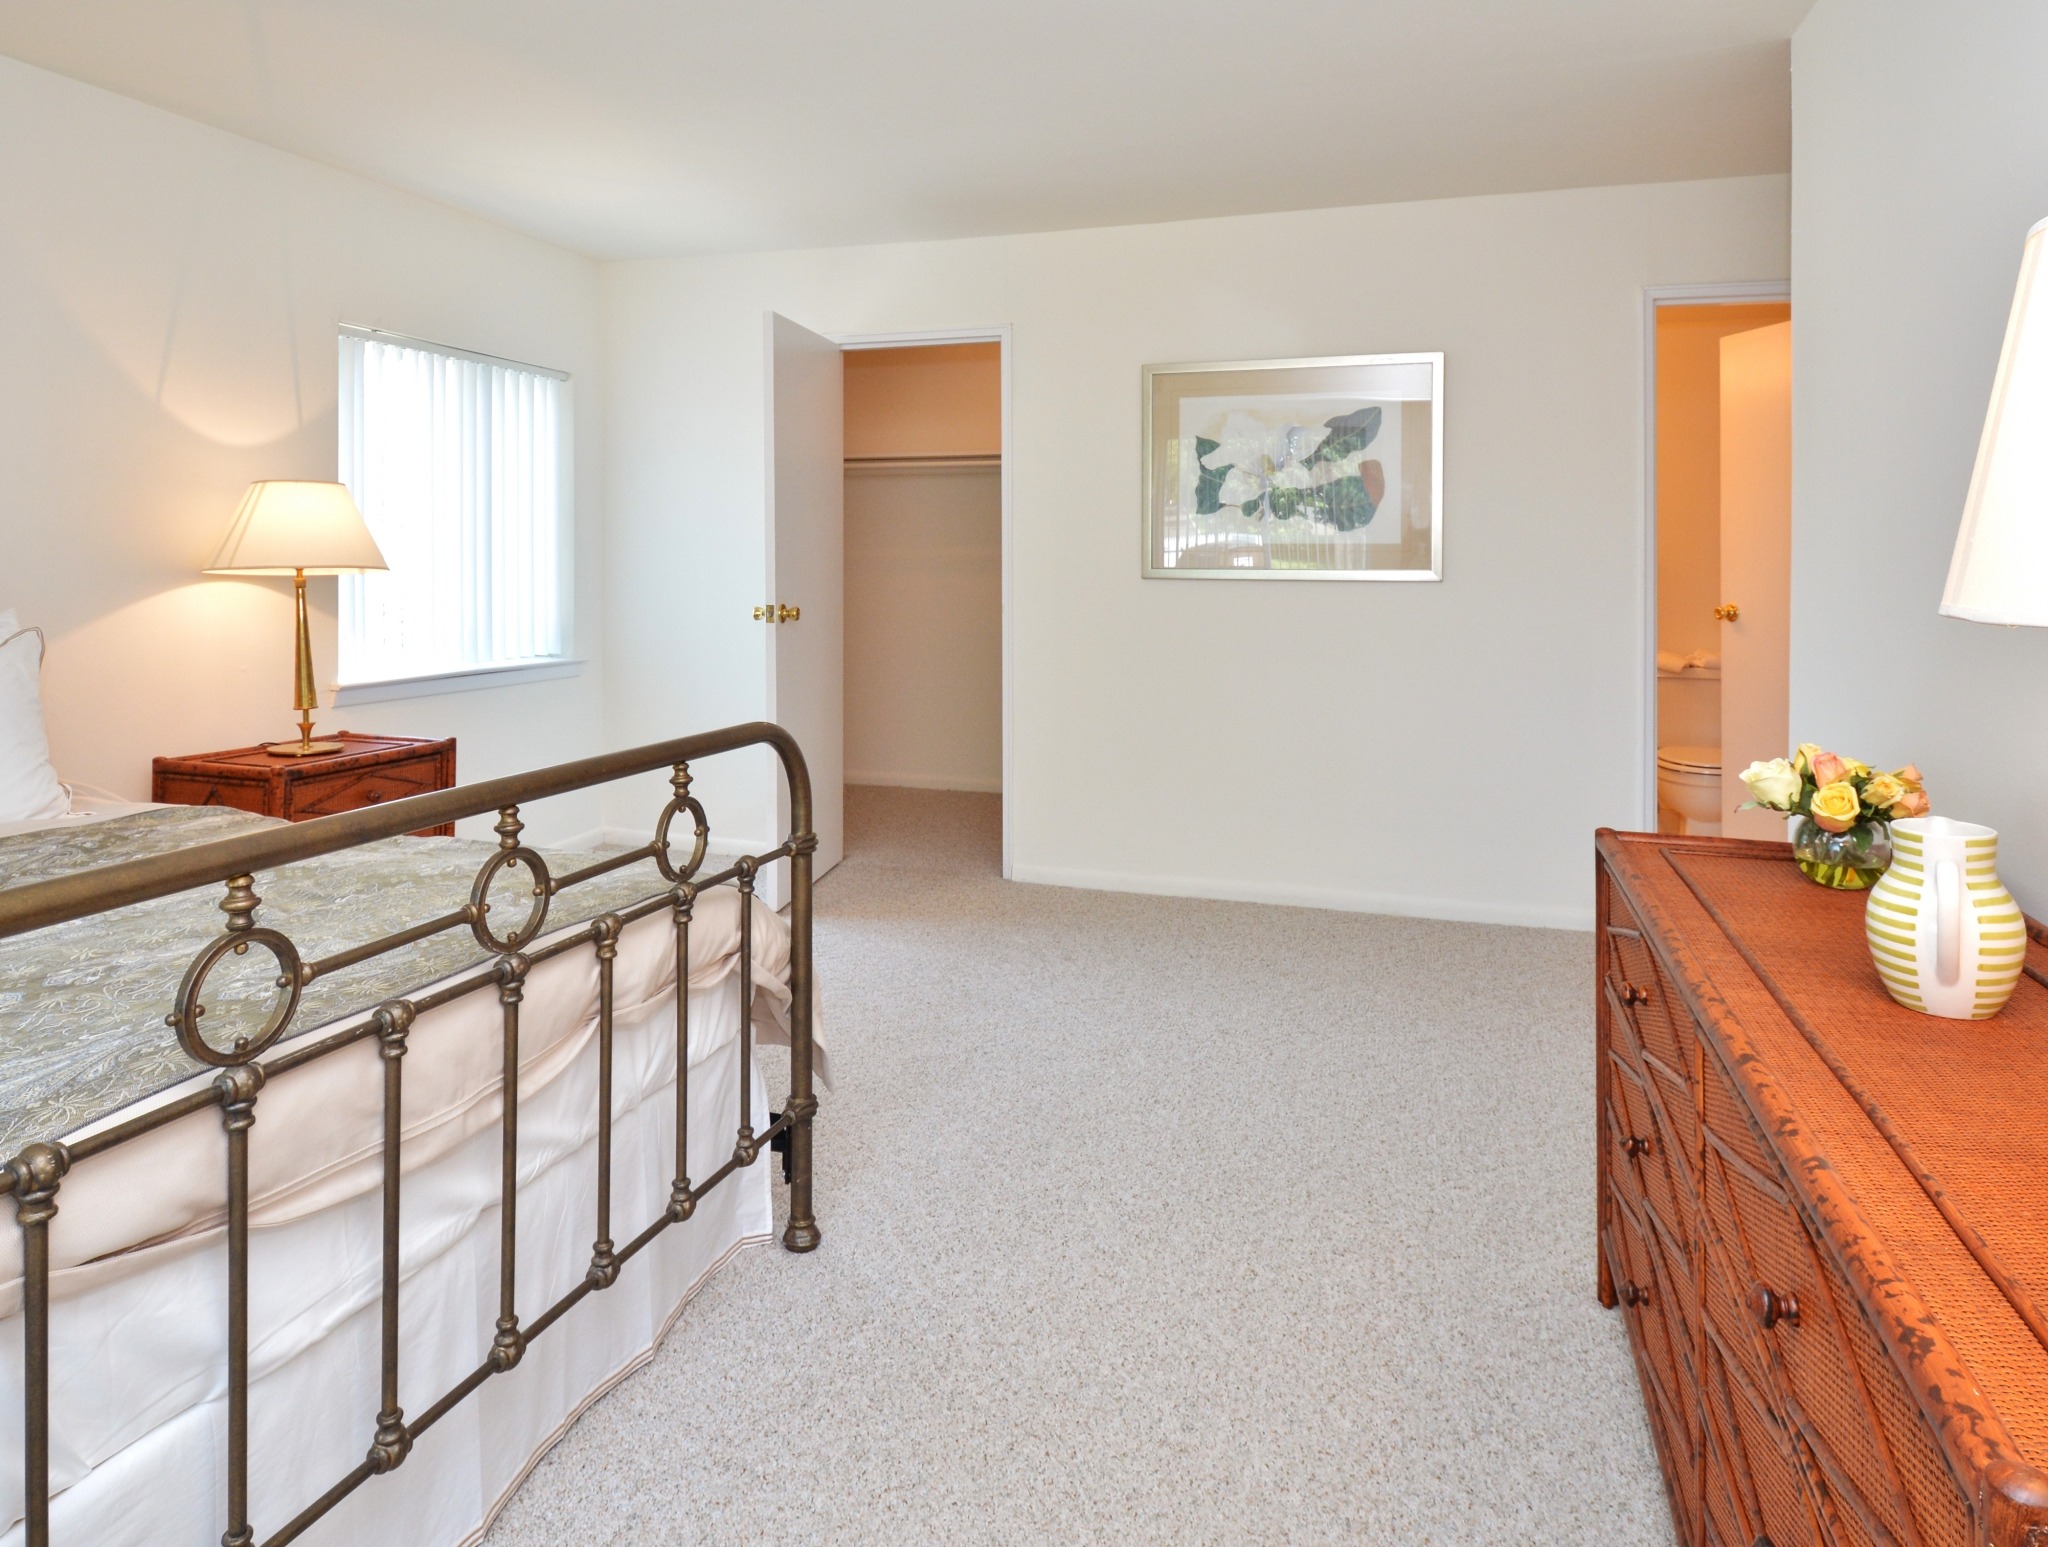 A bedroom at Valley Stream Apartments with carpeting and a closet